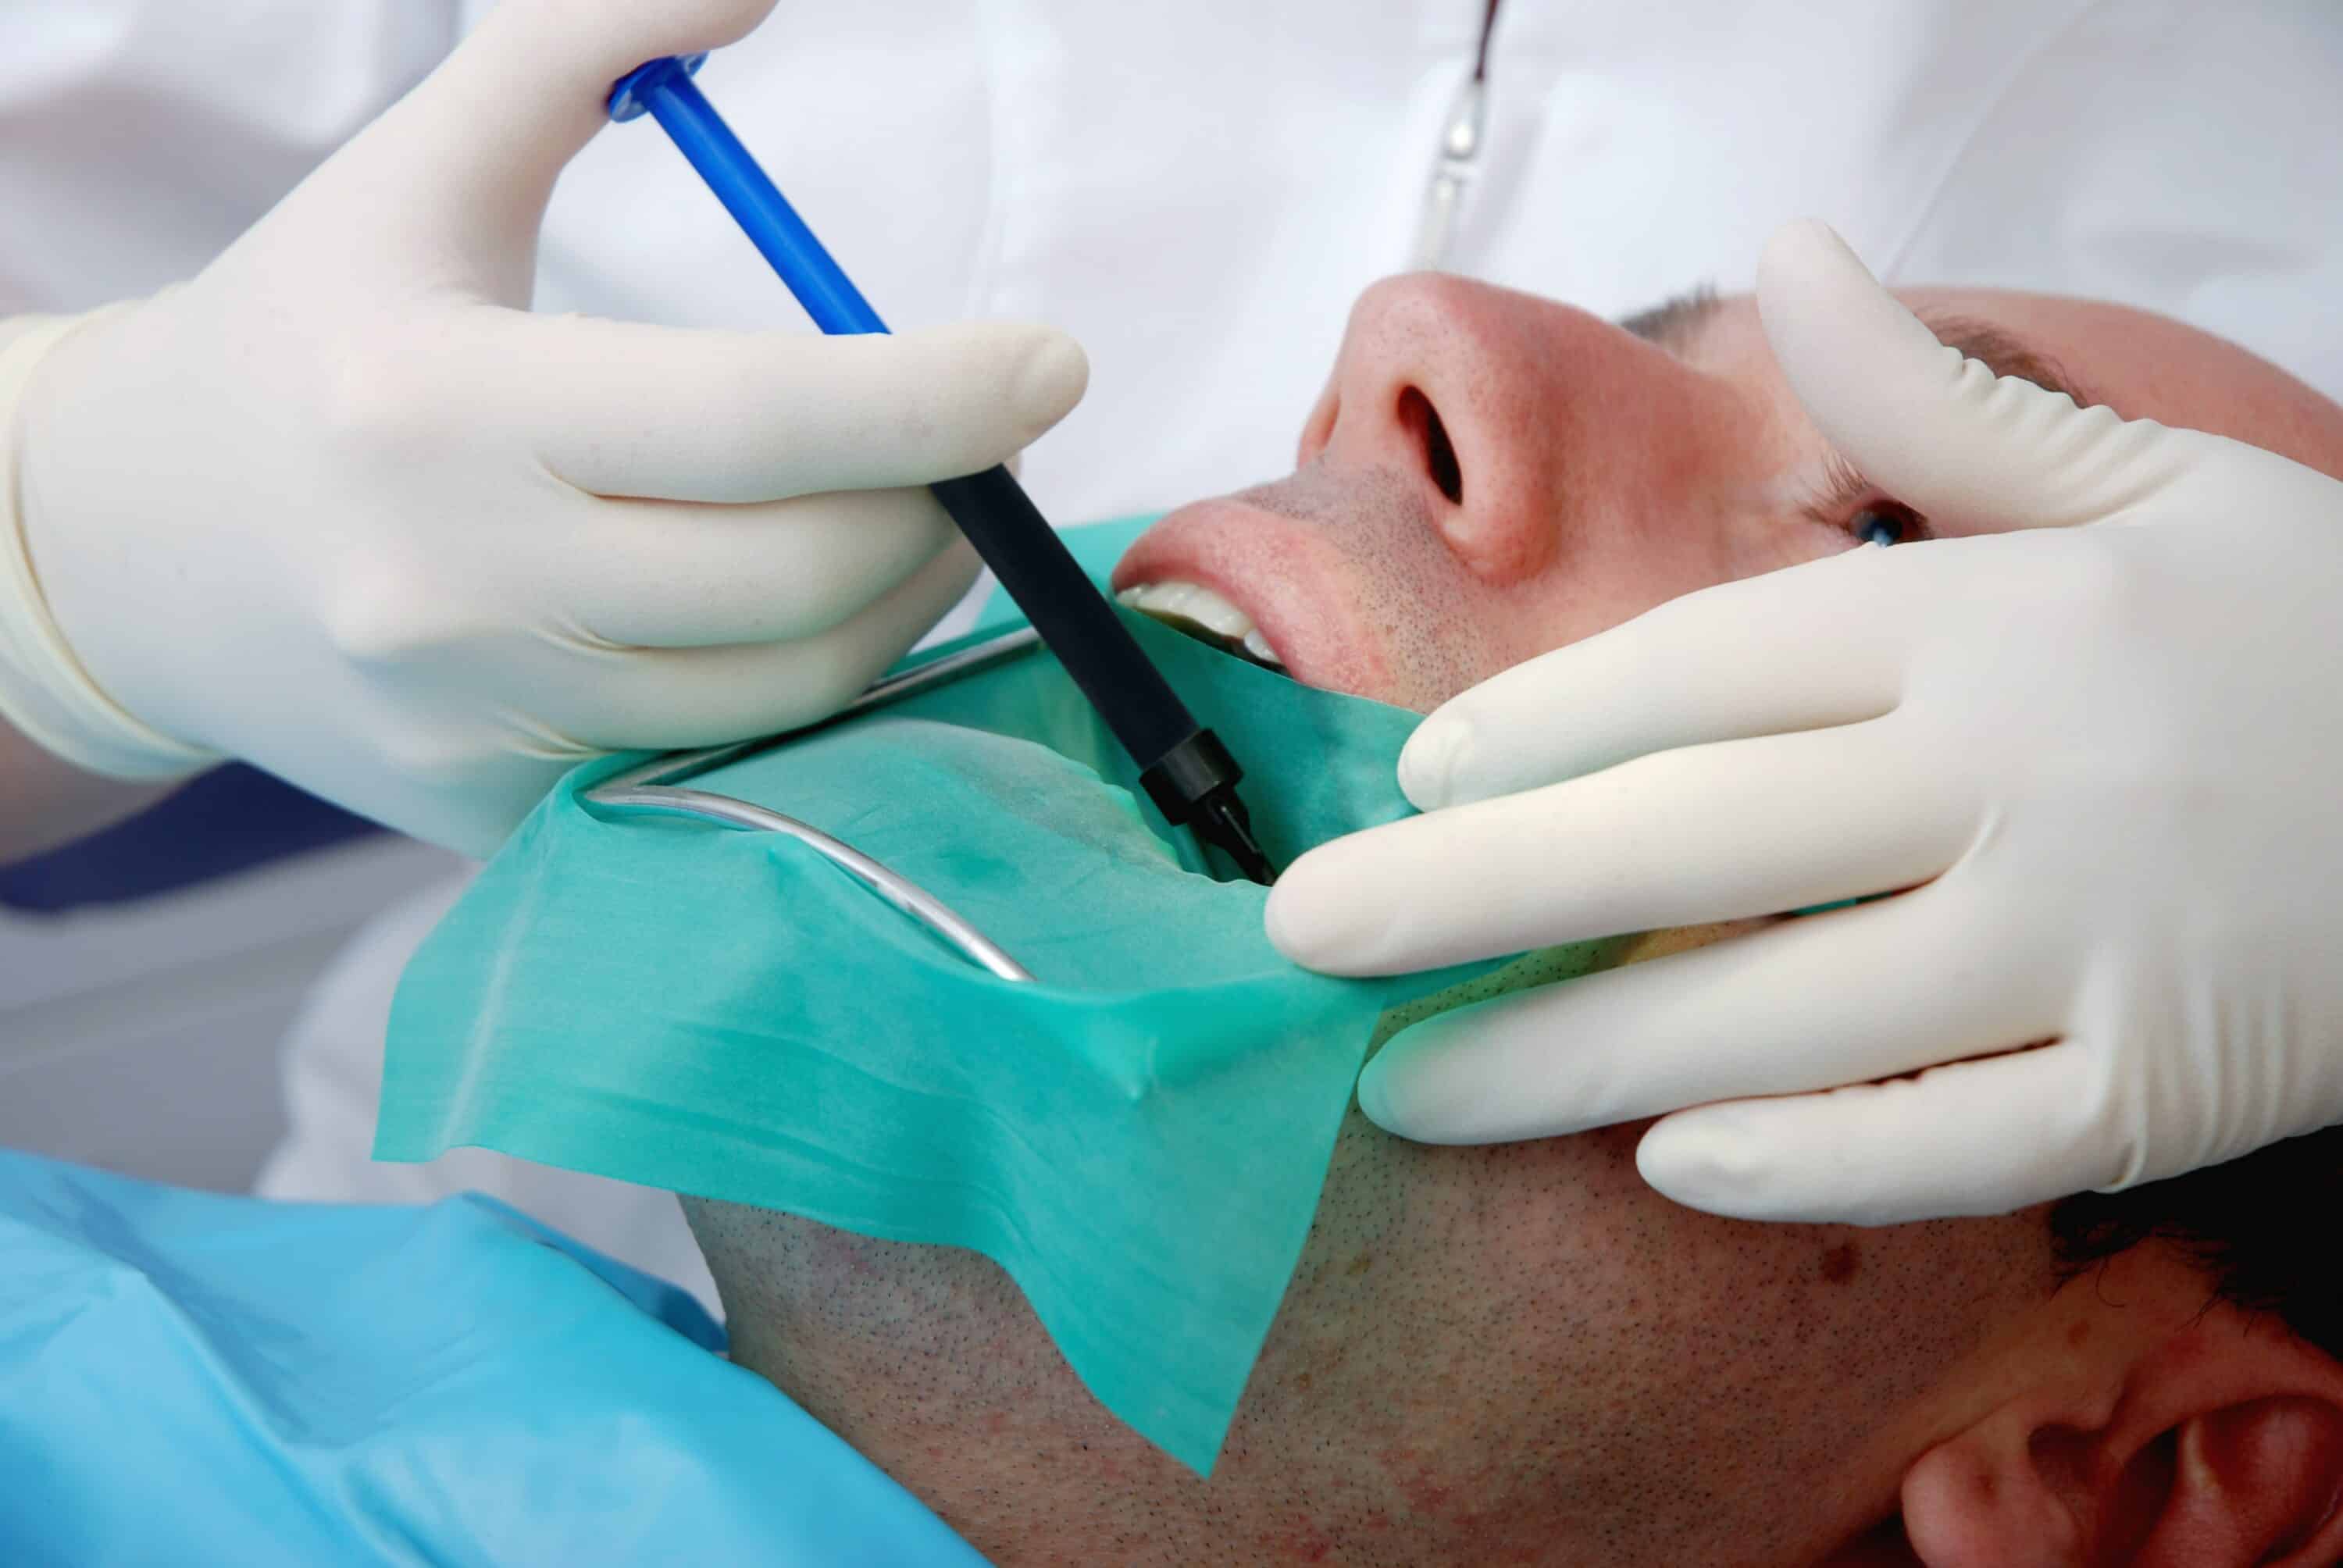 What is root canal treatment?